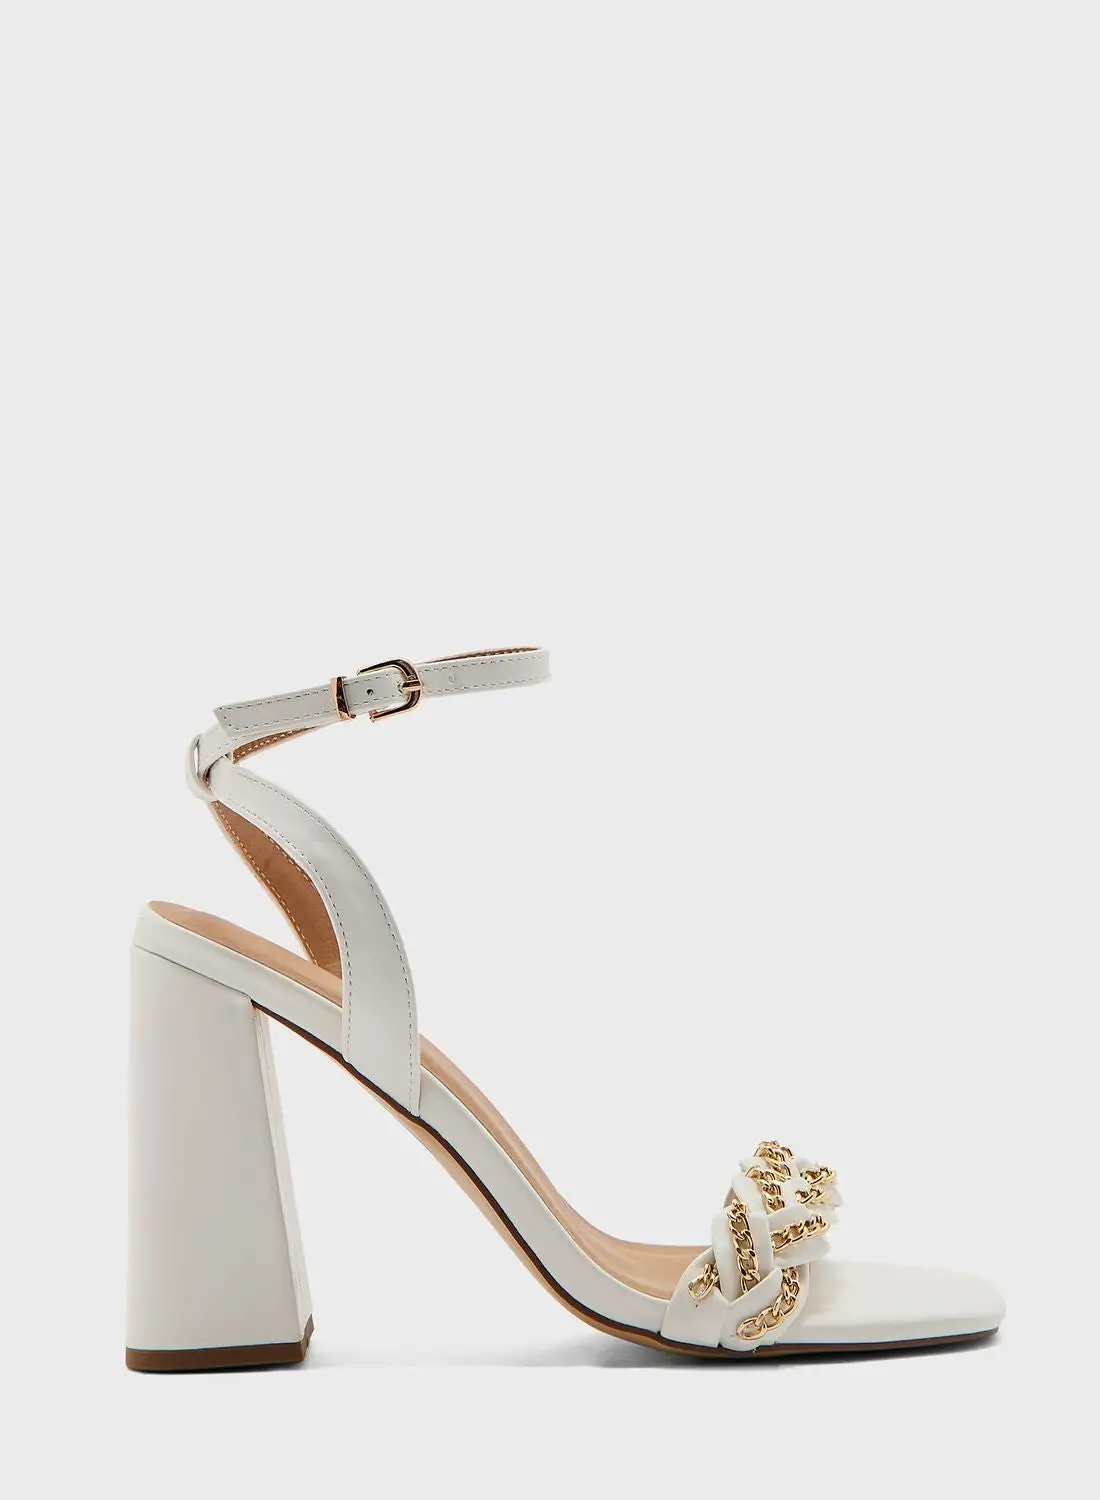 Chi-Chi London Strappy Chain Detail Up Heeled Sandals